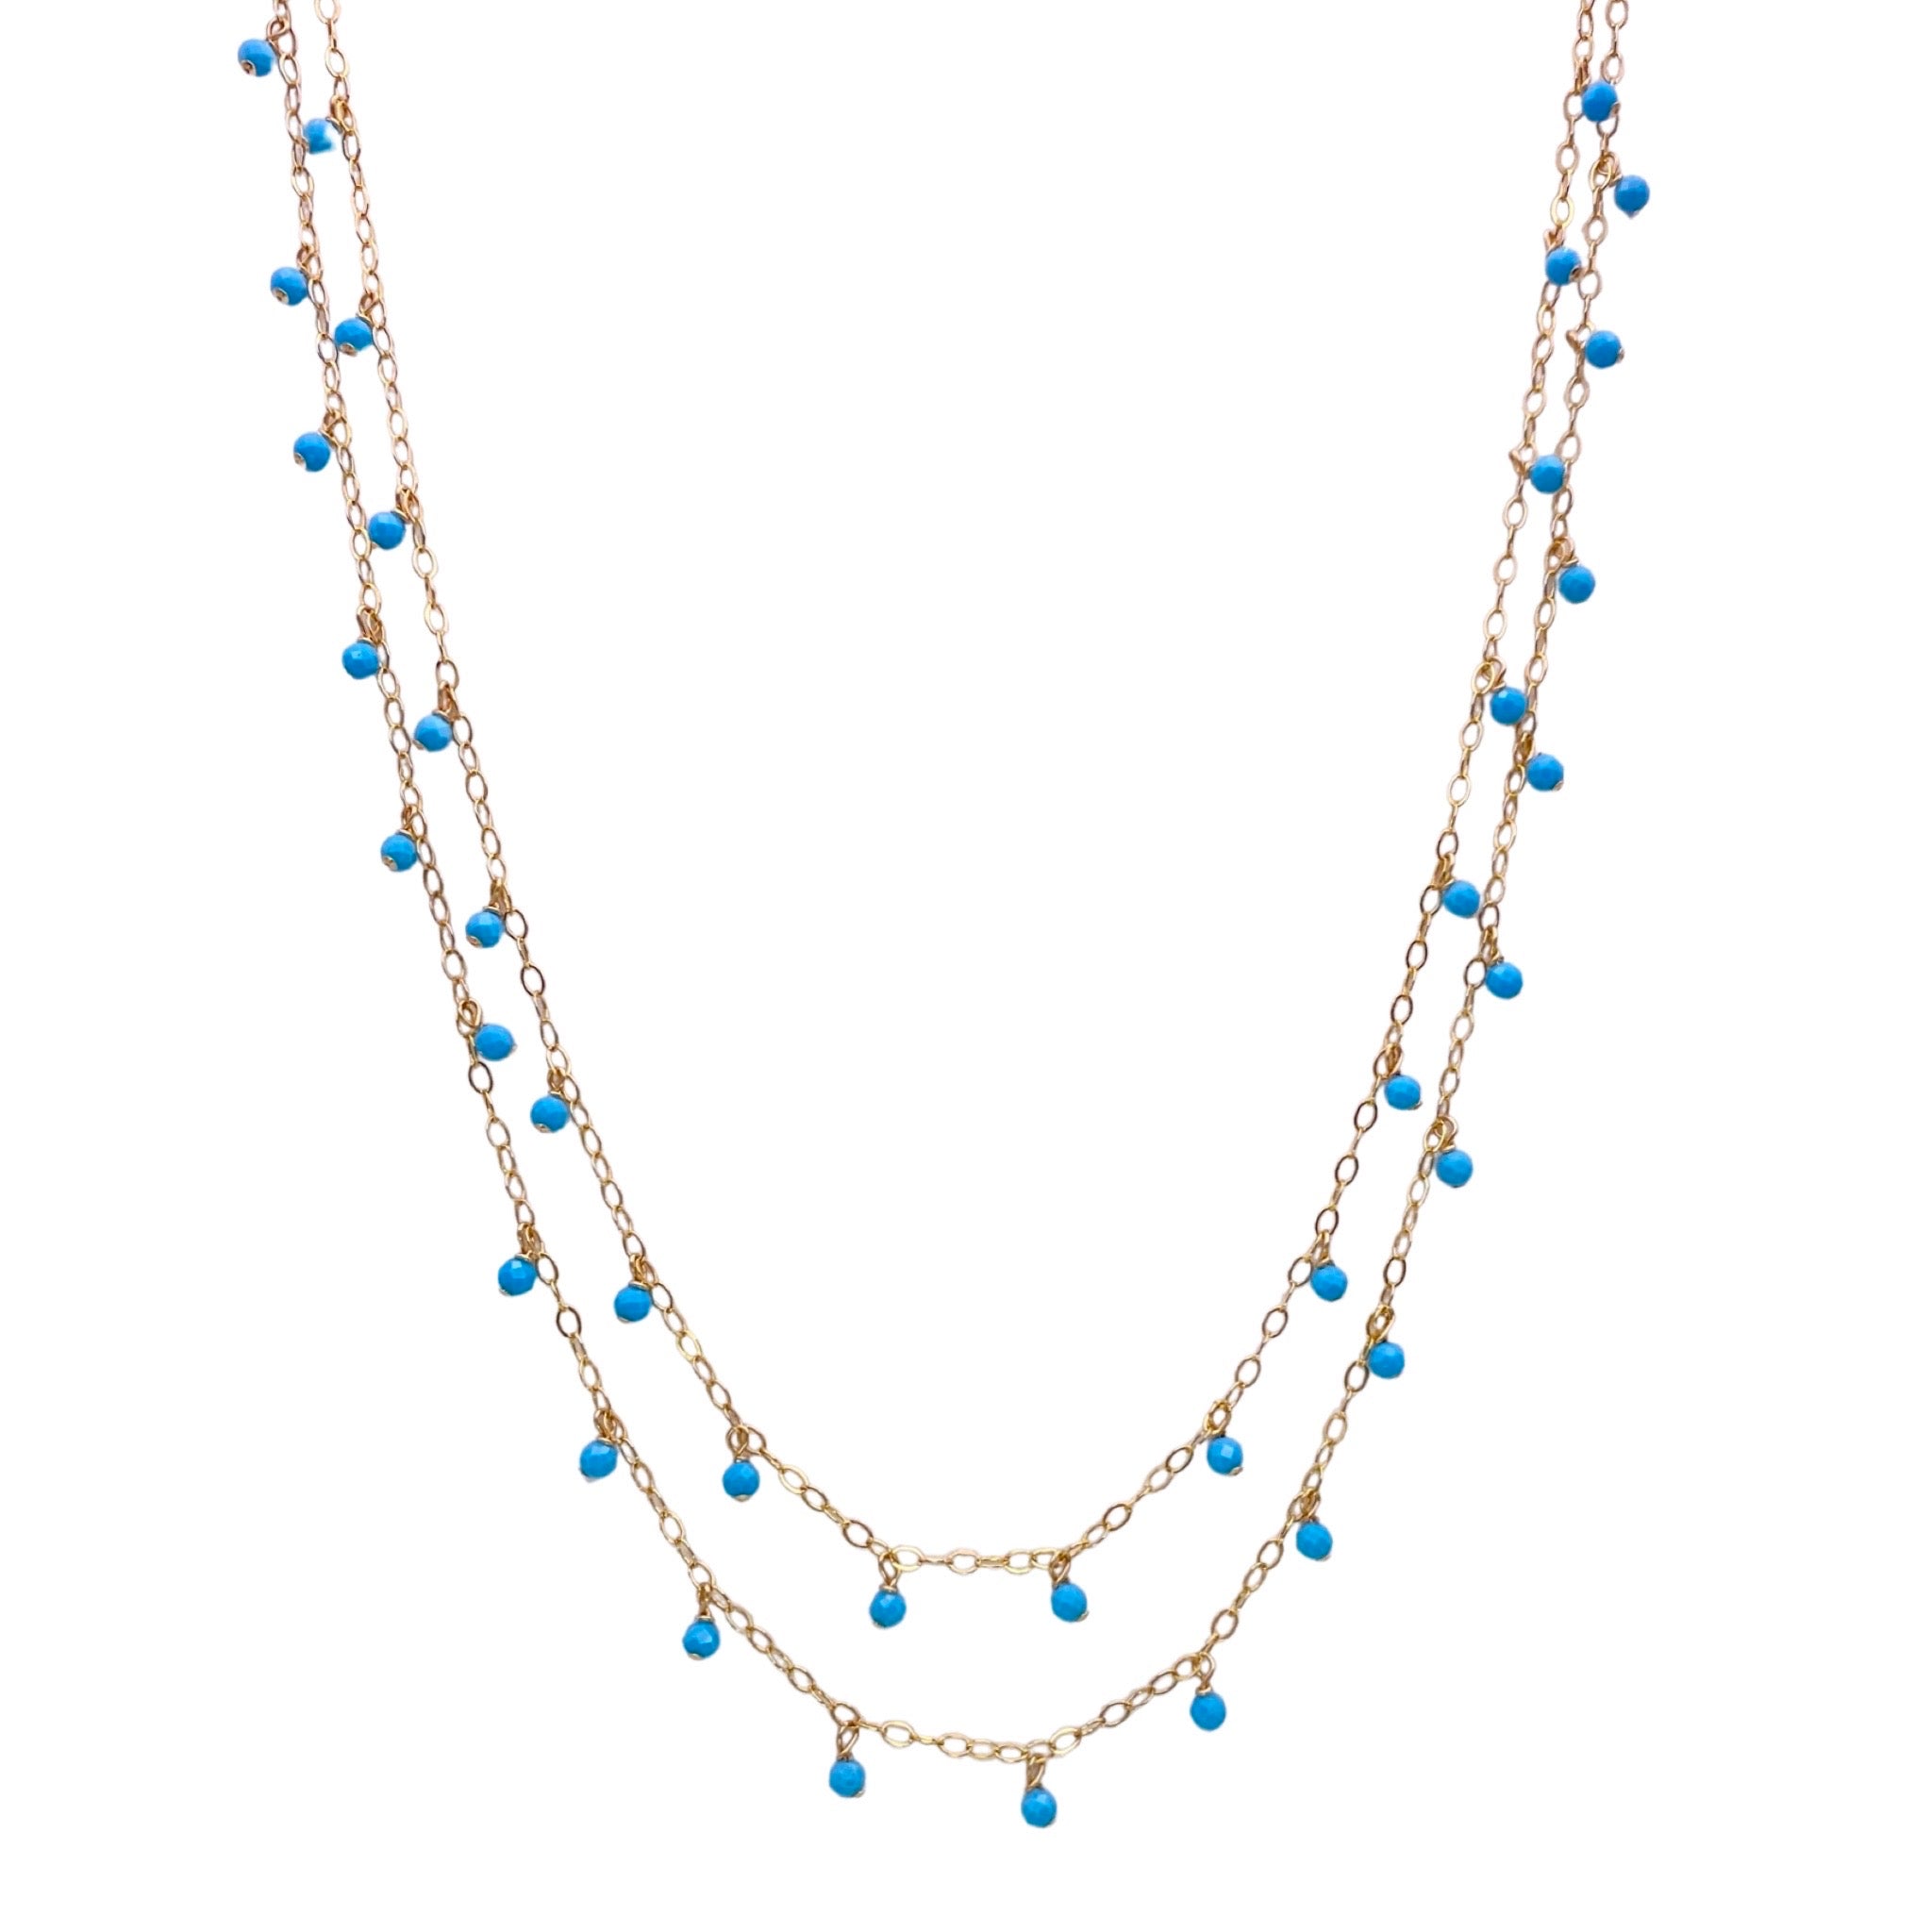 Sonya Renee Yes Please Necklace & Earring Set - Available at Shaylula Jewlery & Gifts in Tarrytown, NY and online. This Shaylula Exclusive set is comprised of the ever favorite Yes Please Necklace & Earrings, and is one of our best sellers! The double strand necklace features turquoise drops on a shimmer chain. The delicate, linear drop earrings have a cascade of turquoise beads and is finished with a wire wrapped moonstone briolette. Feminine and sexy! • Turquoise, moonstone, 14k gold filled 